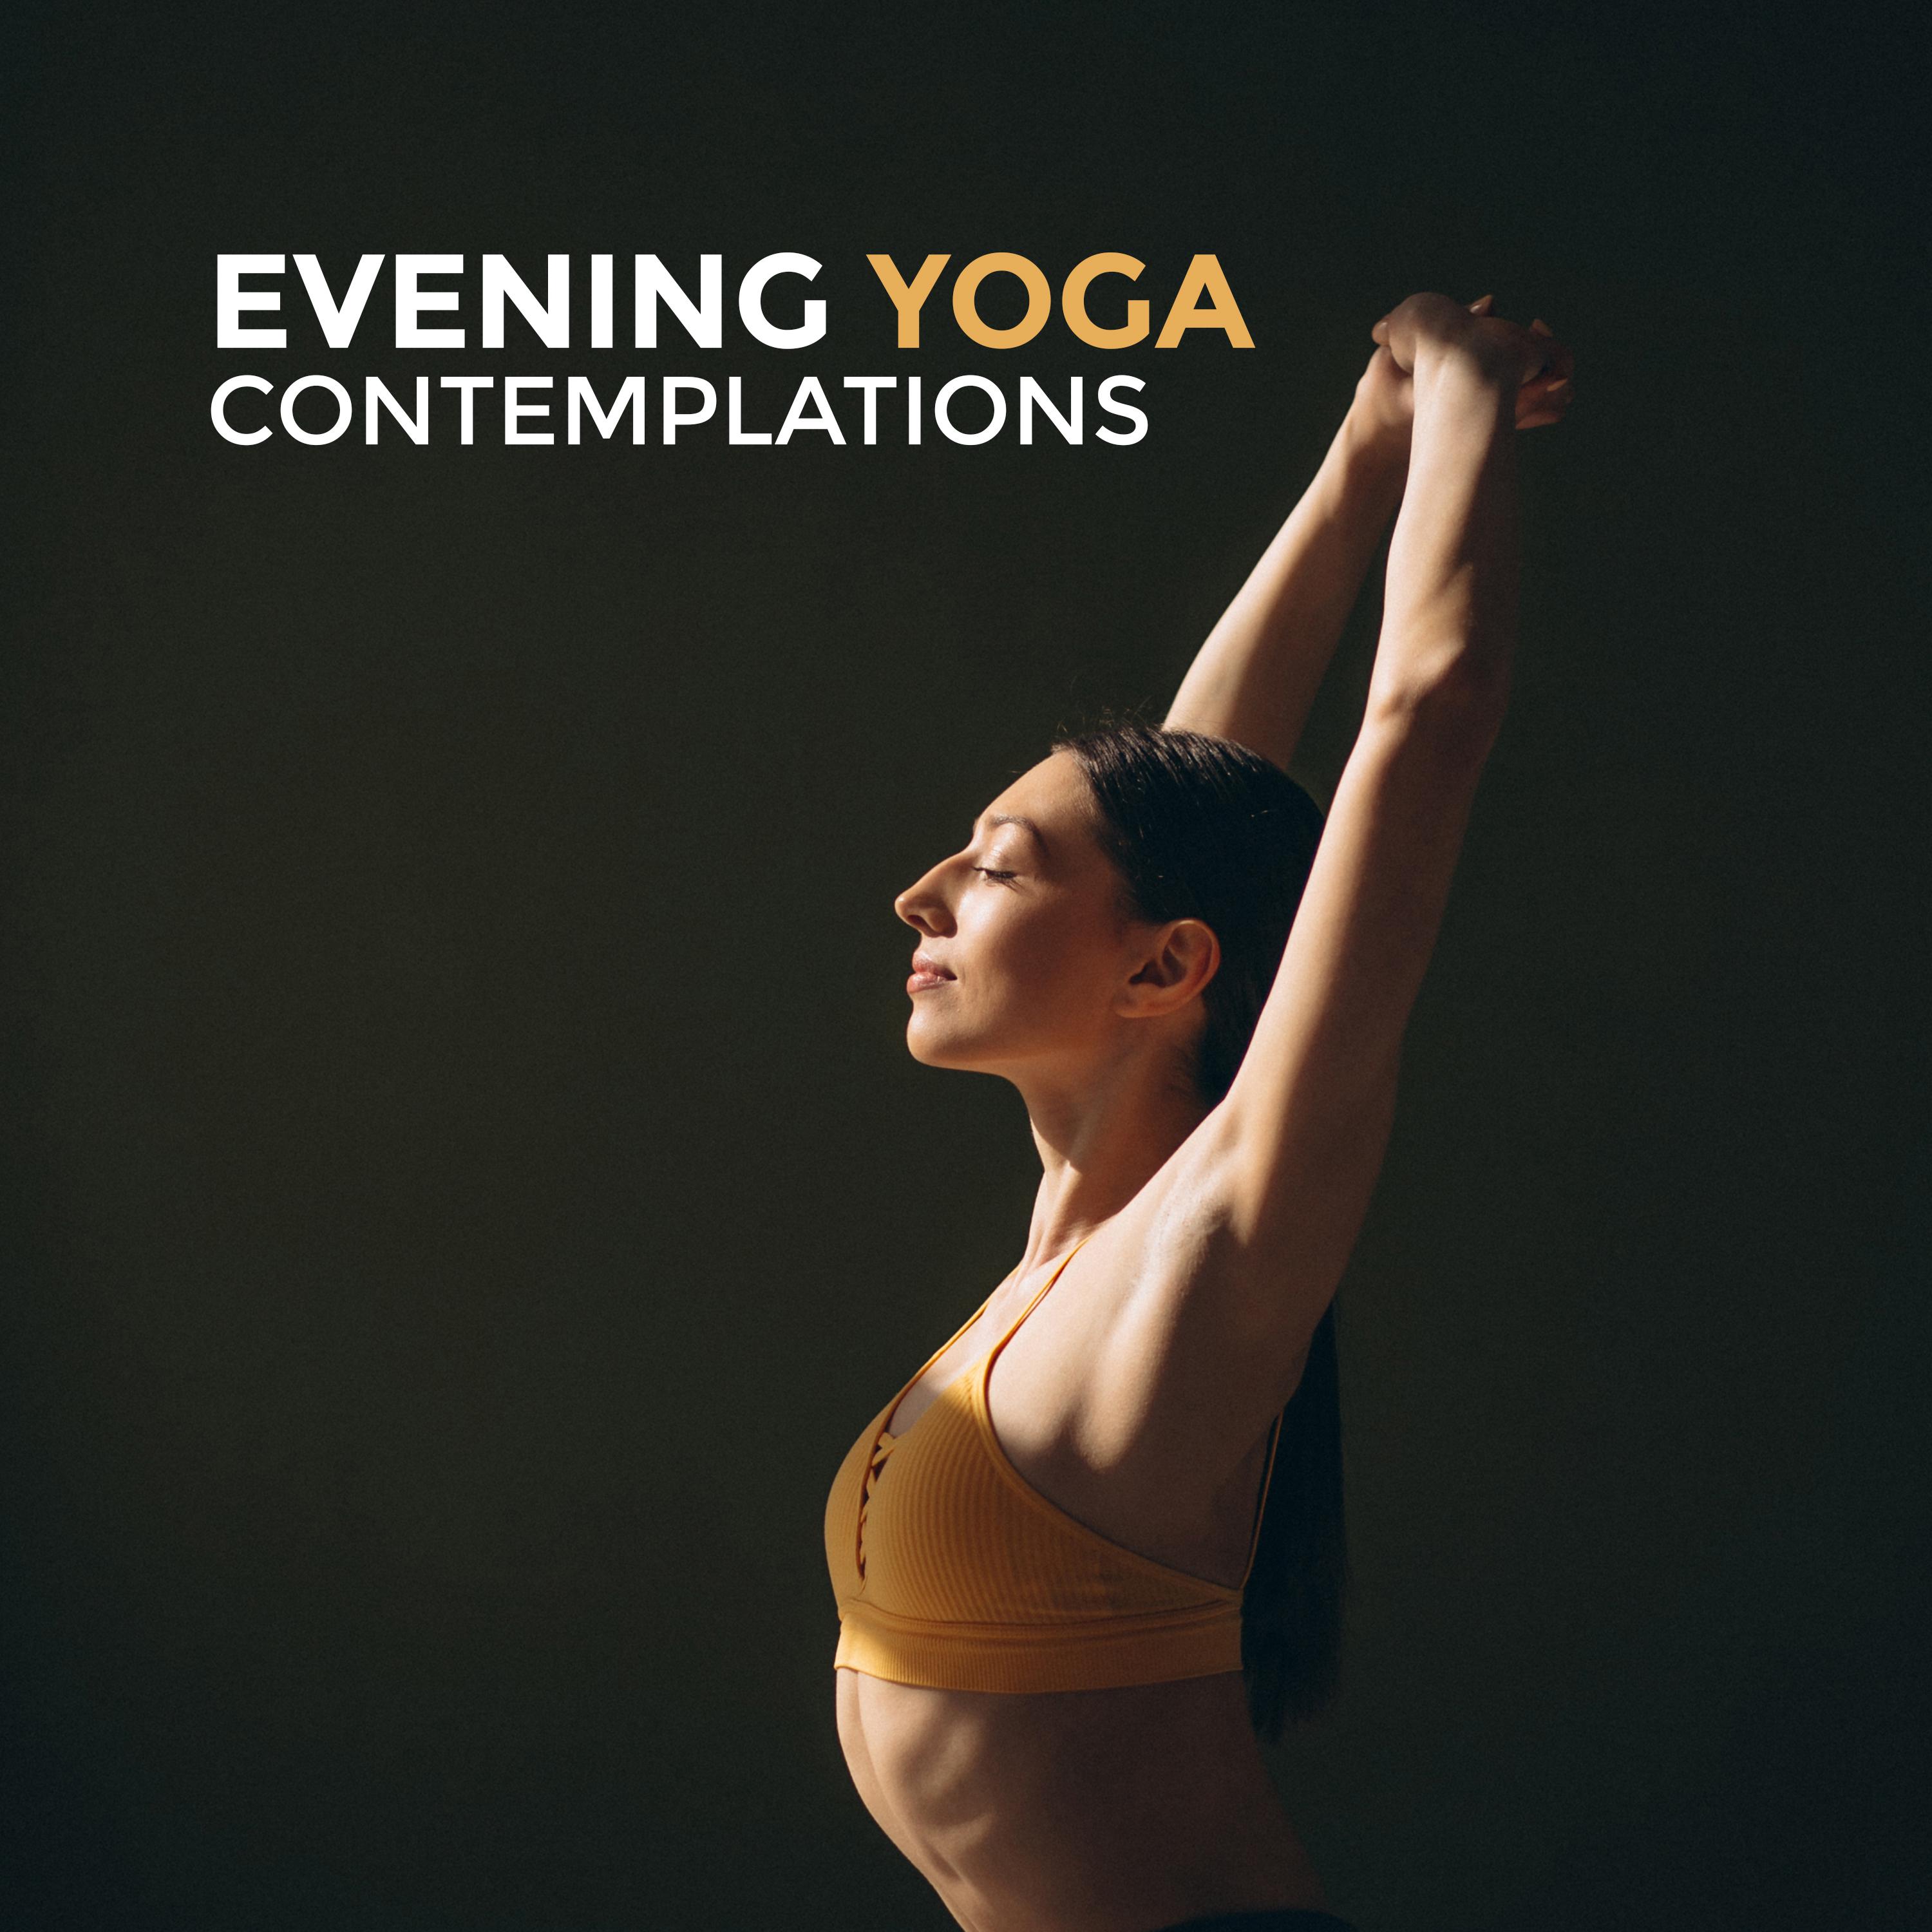 Evening Yoga Contemplations: Selection of 2019 New Age Songs for Meditation & Relaxation, Nature & Ambient Sounds, Mindfulness Training